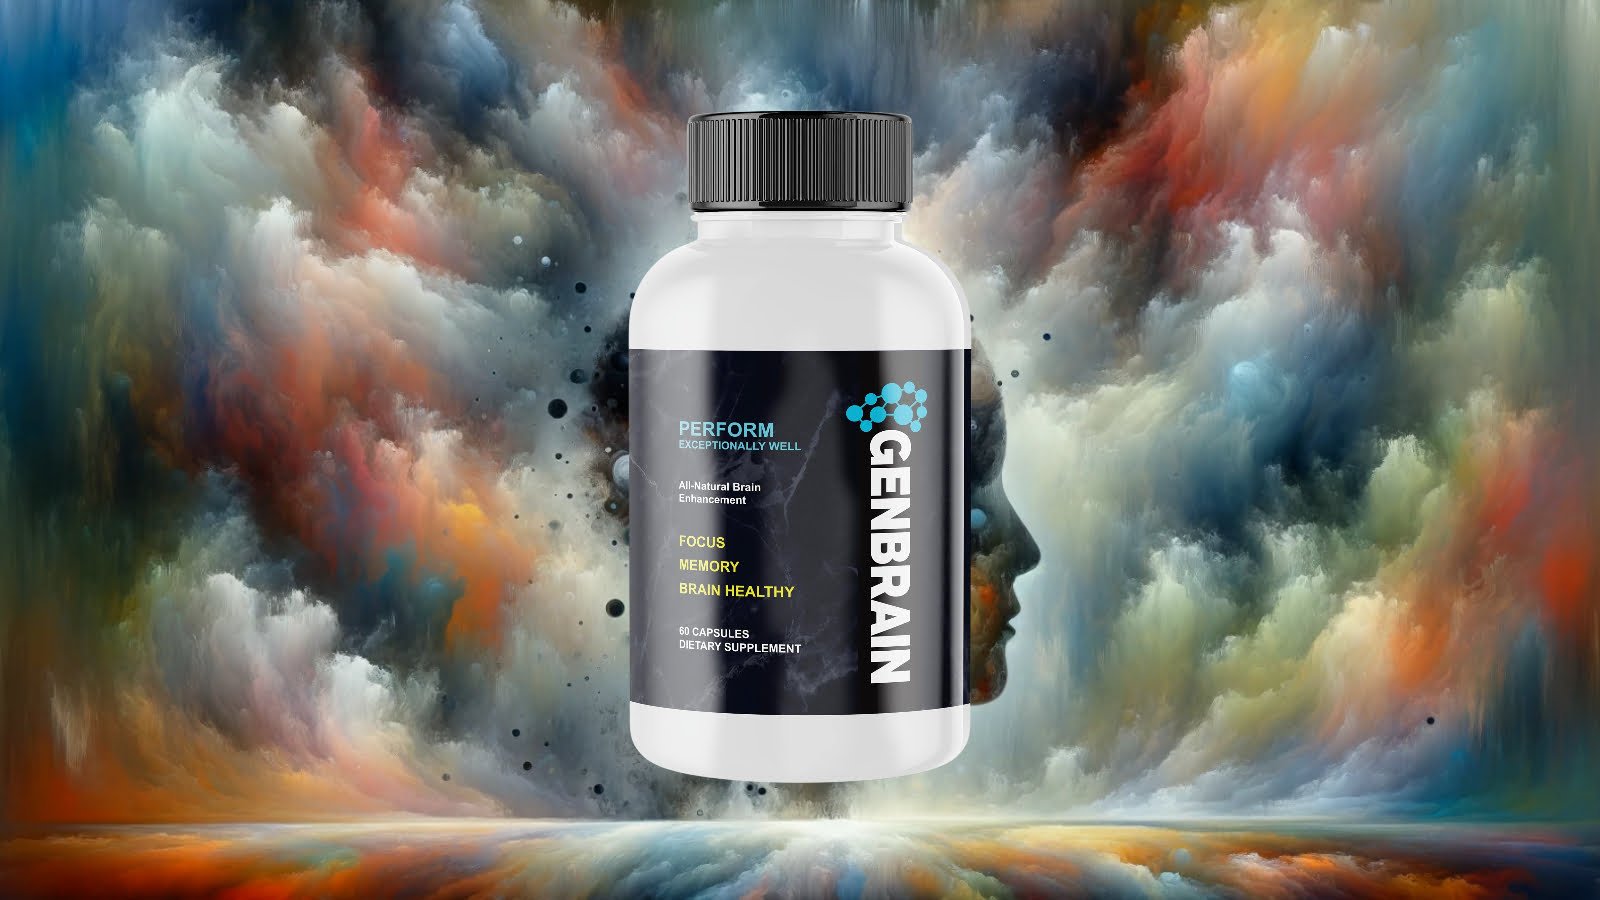 Review of GenBrain's impact on cognitive enhancement with an advanced formula.